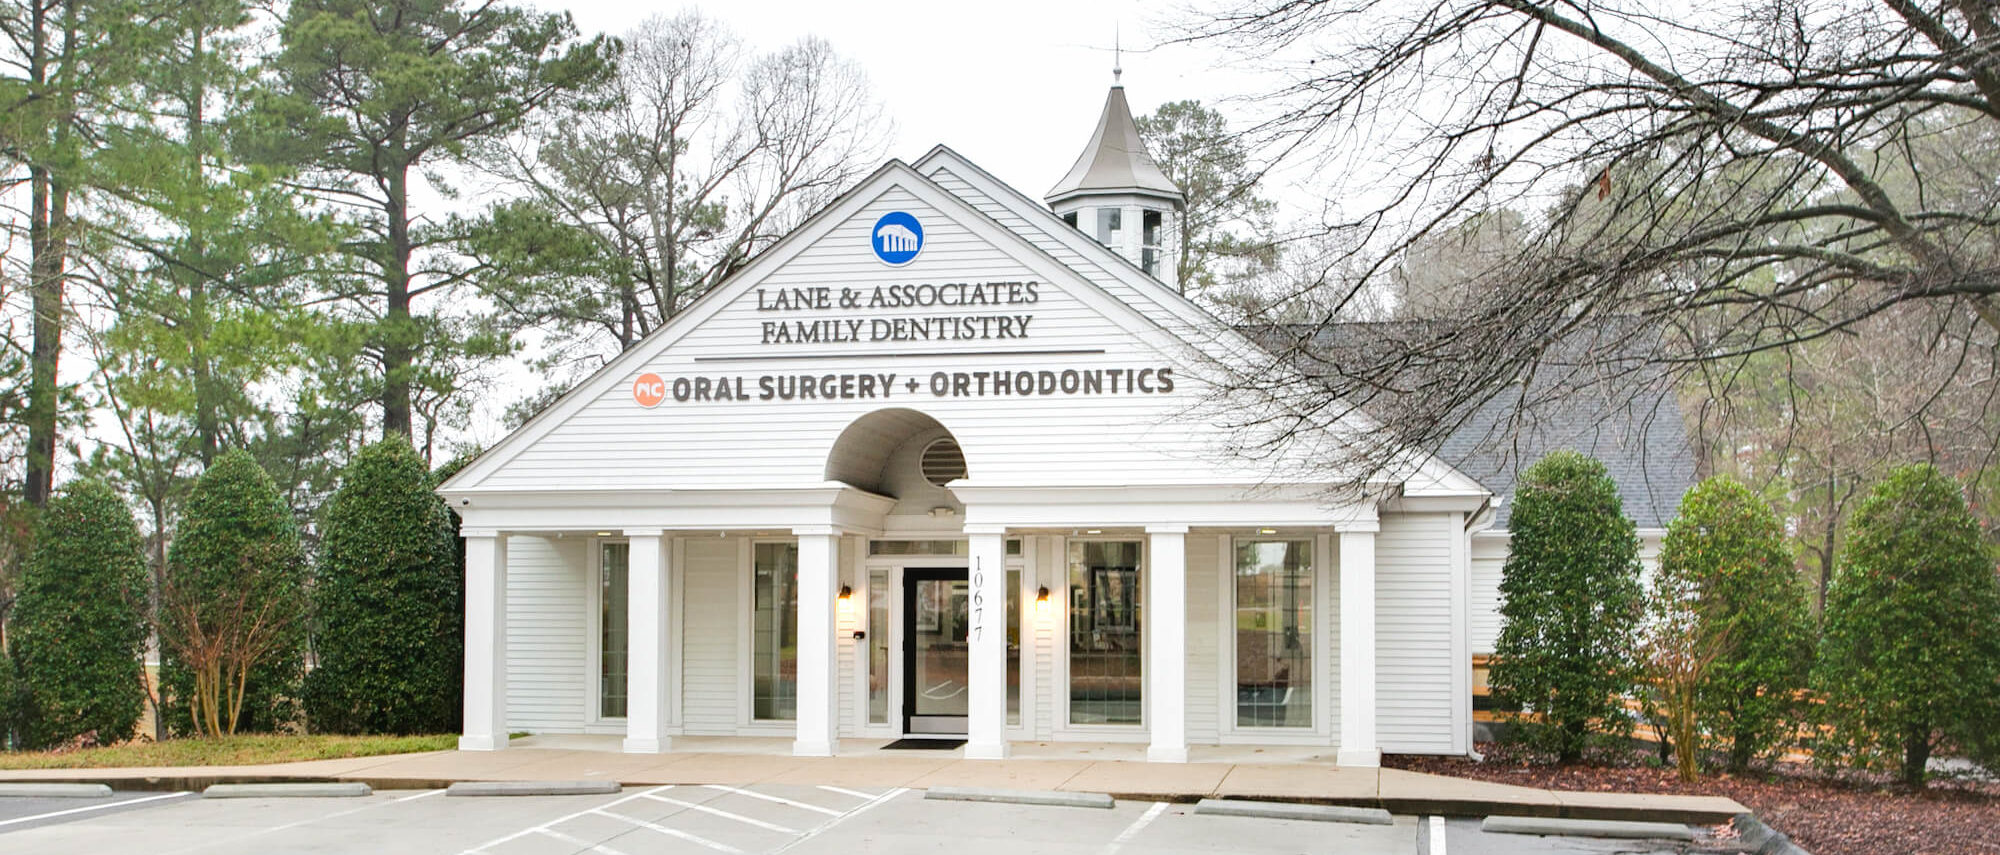 White building with triangular roof and columns and Lane DDS sign on front